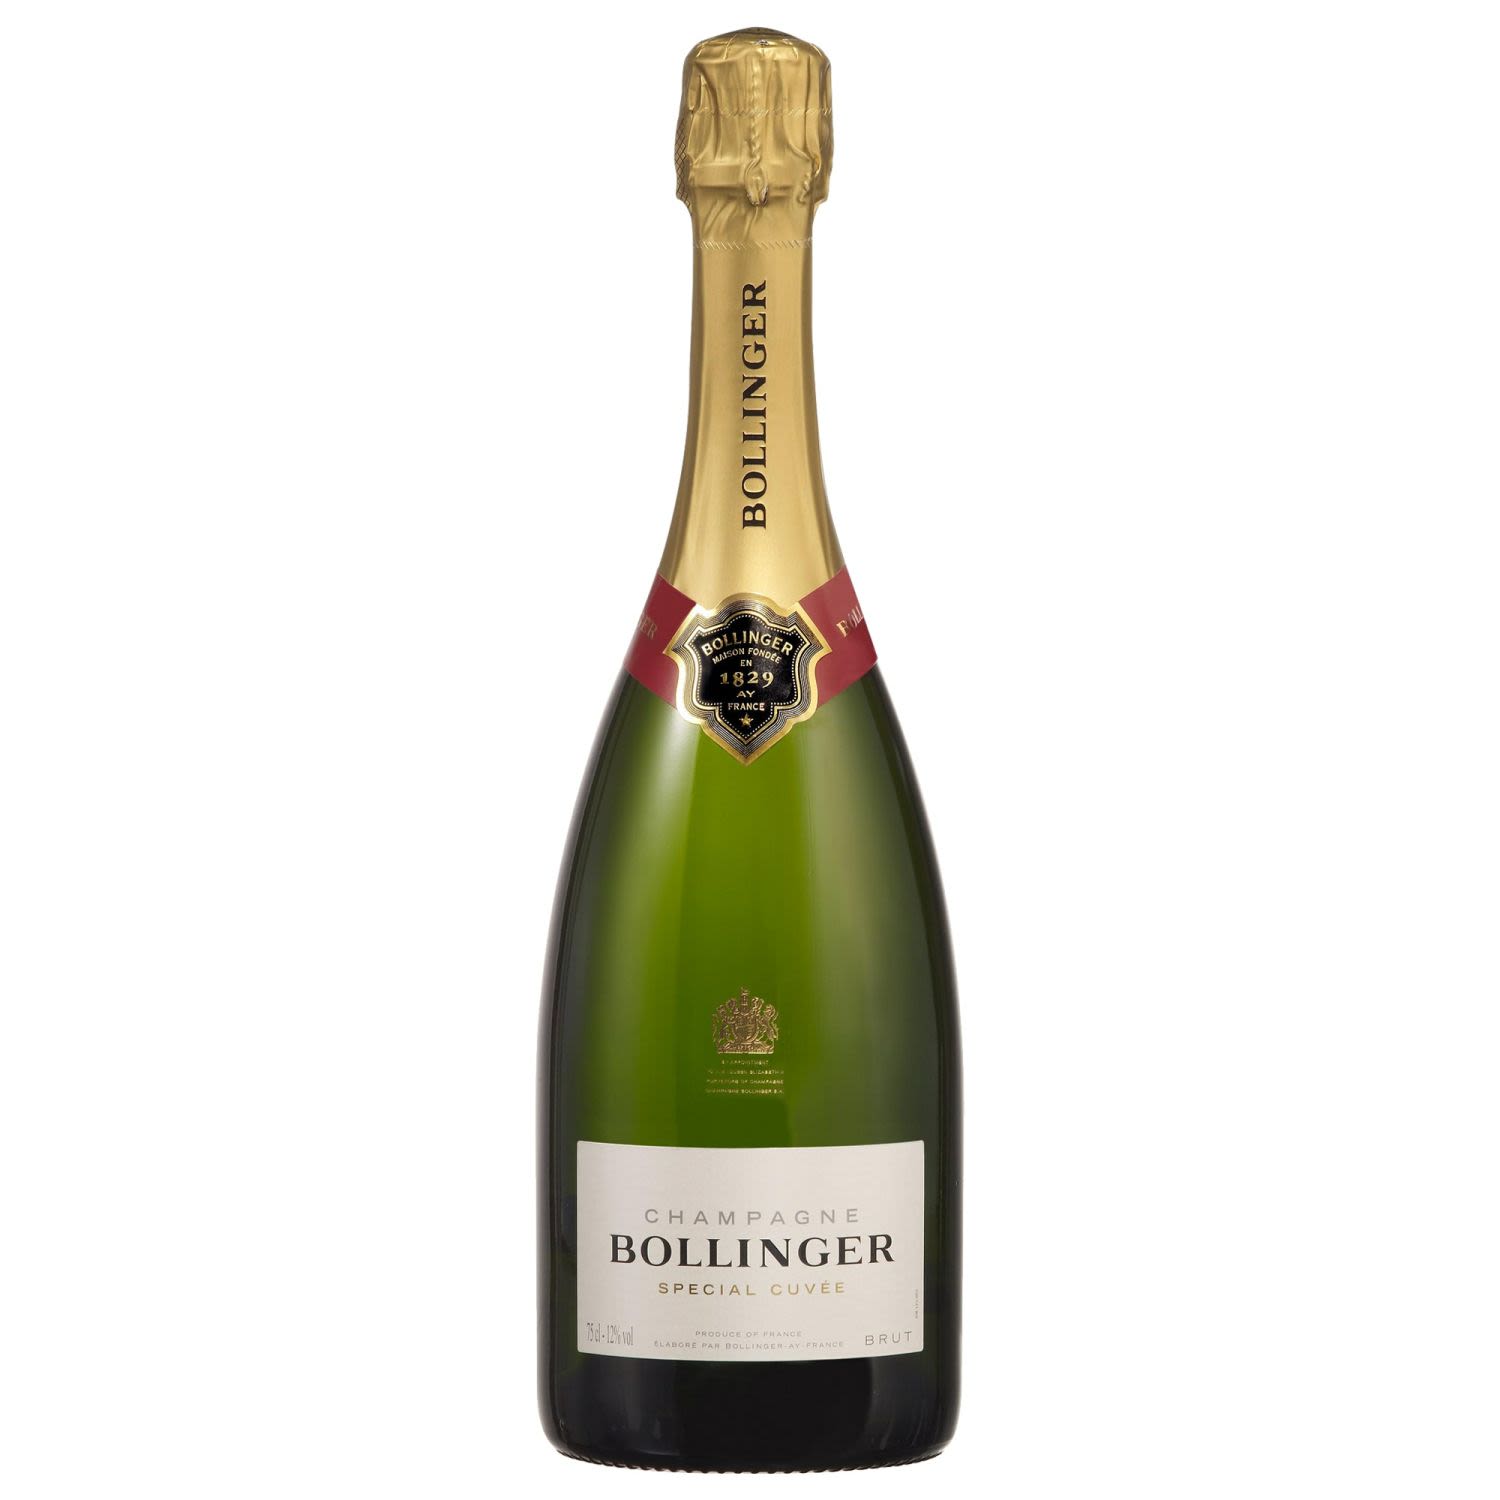 Bollinger Special Cuvée Champagne NV is one of the world's best NV Champagnes. Special Cuvée is the result of the delicate blending between harvest grapes and a majority of reserve wines, part of which have been aged in magnums for 5 to 15 years.<br /> <br />Alcohol Volume: 12.00%<br /><br />Pack Format: Bottle<br /><br />Standard Drinks: 7.1<br /><br />Pack Type: Bottle<br /><br />Country of Origin: France<br /><br />Region: Champagne<br /><br />Vintage: Non Vintage<br />